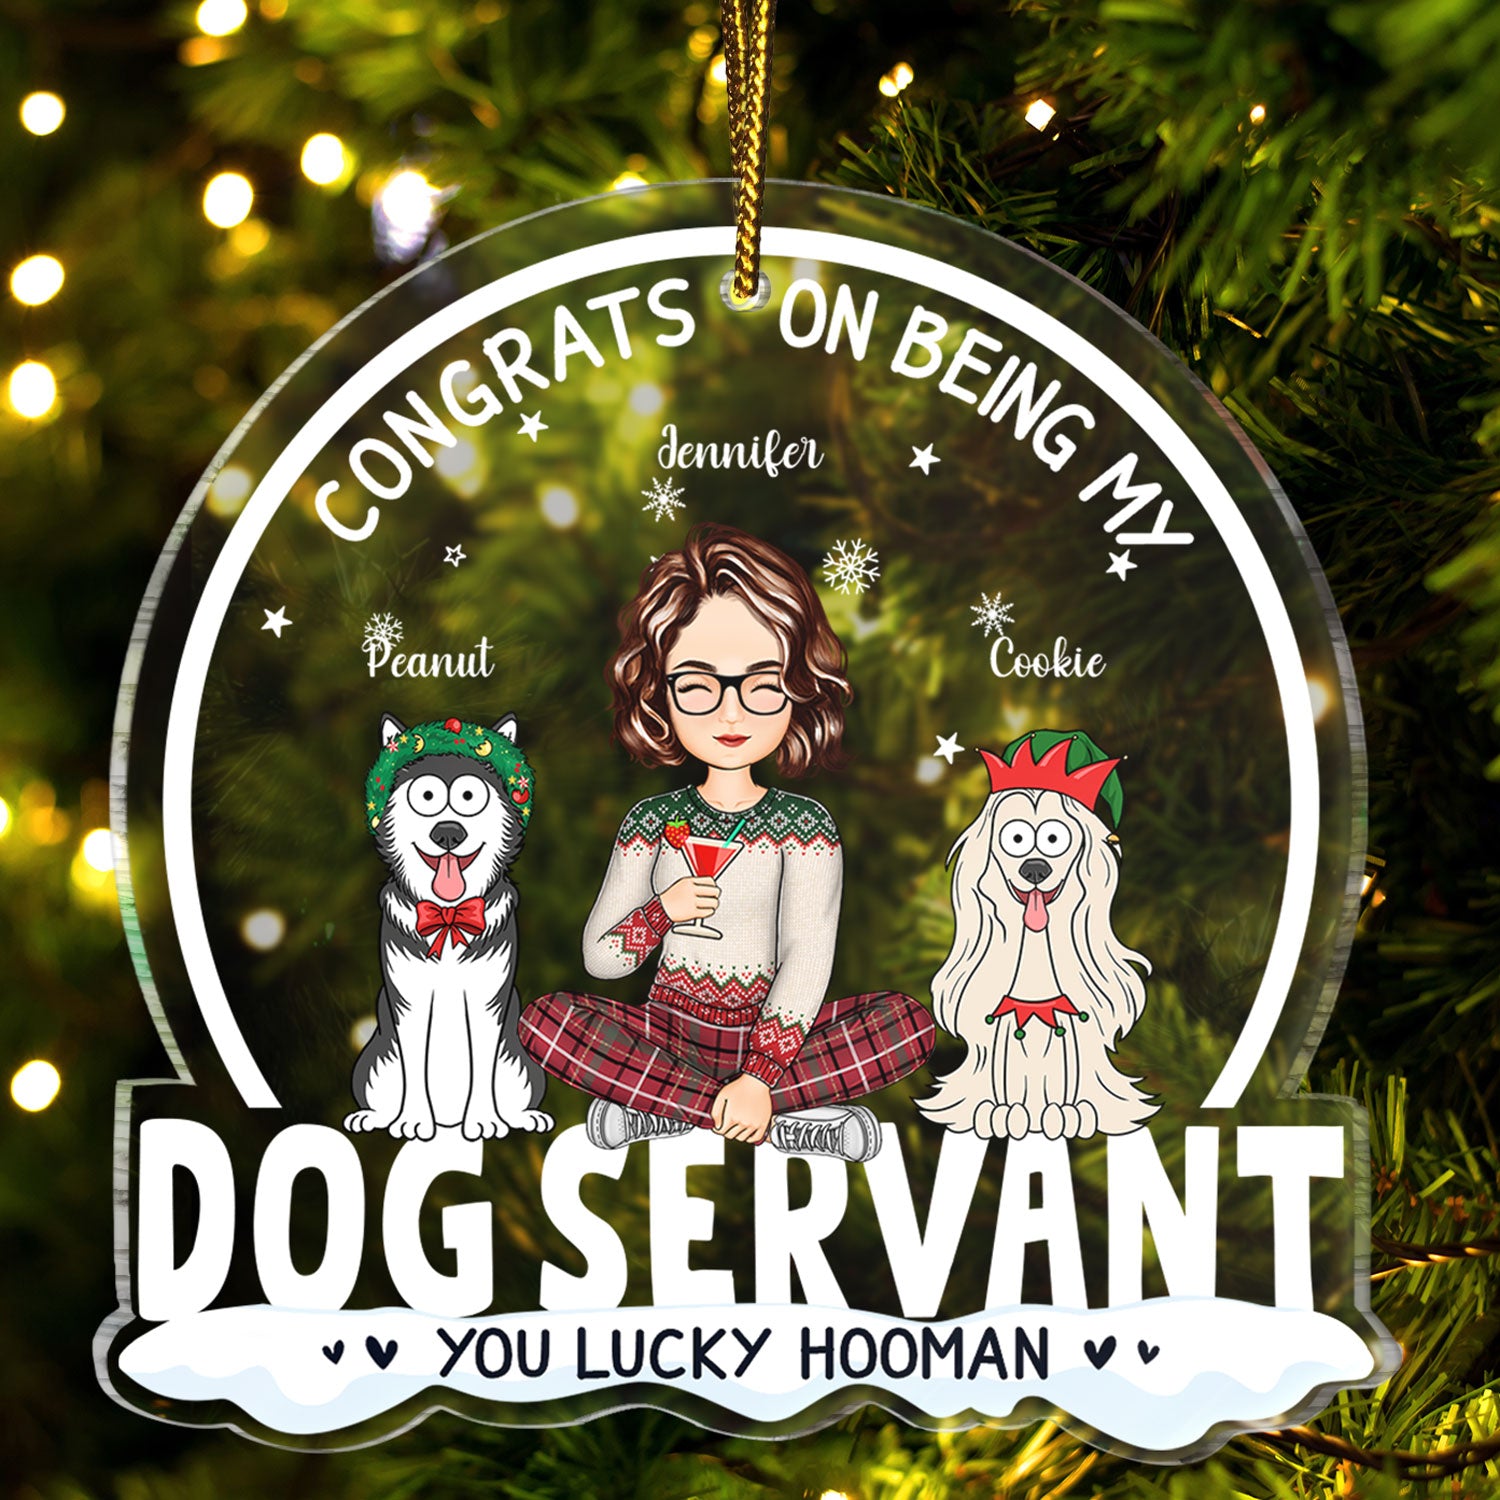 Congrats On Being My Dog Servant Funny Cartoon Style - Christmas Gift For Dog Lovers, Dog Moms, Dog Dads - Personalized Custom Shaped Acrylic Ornament